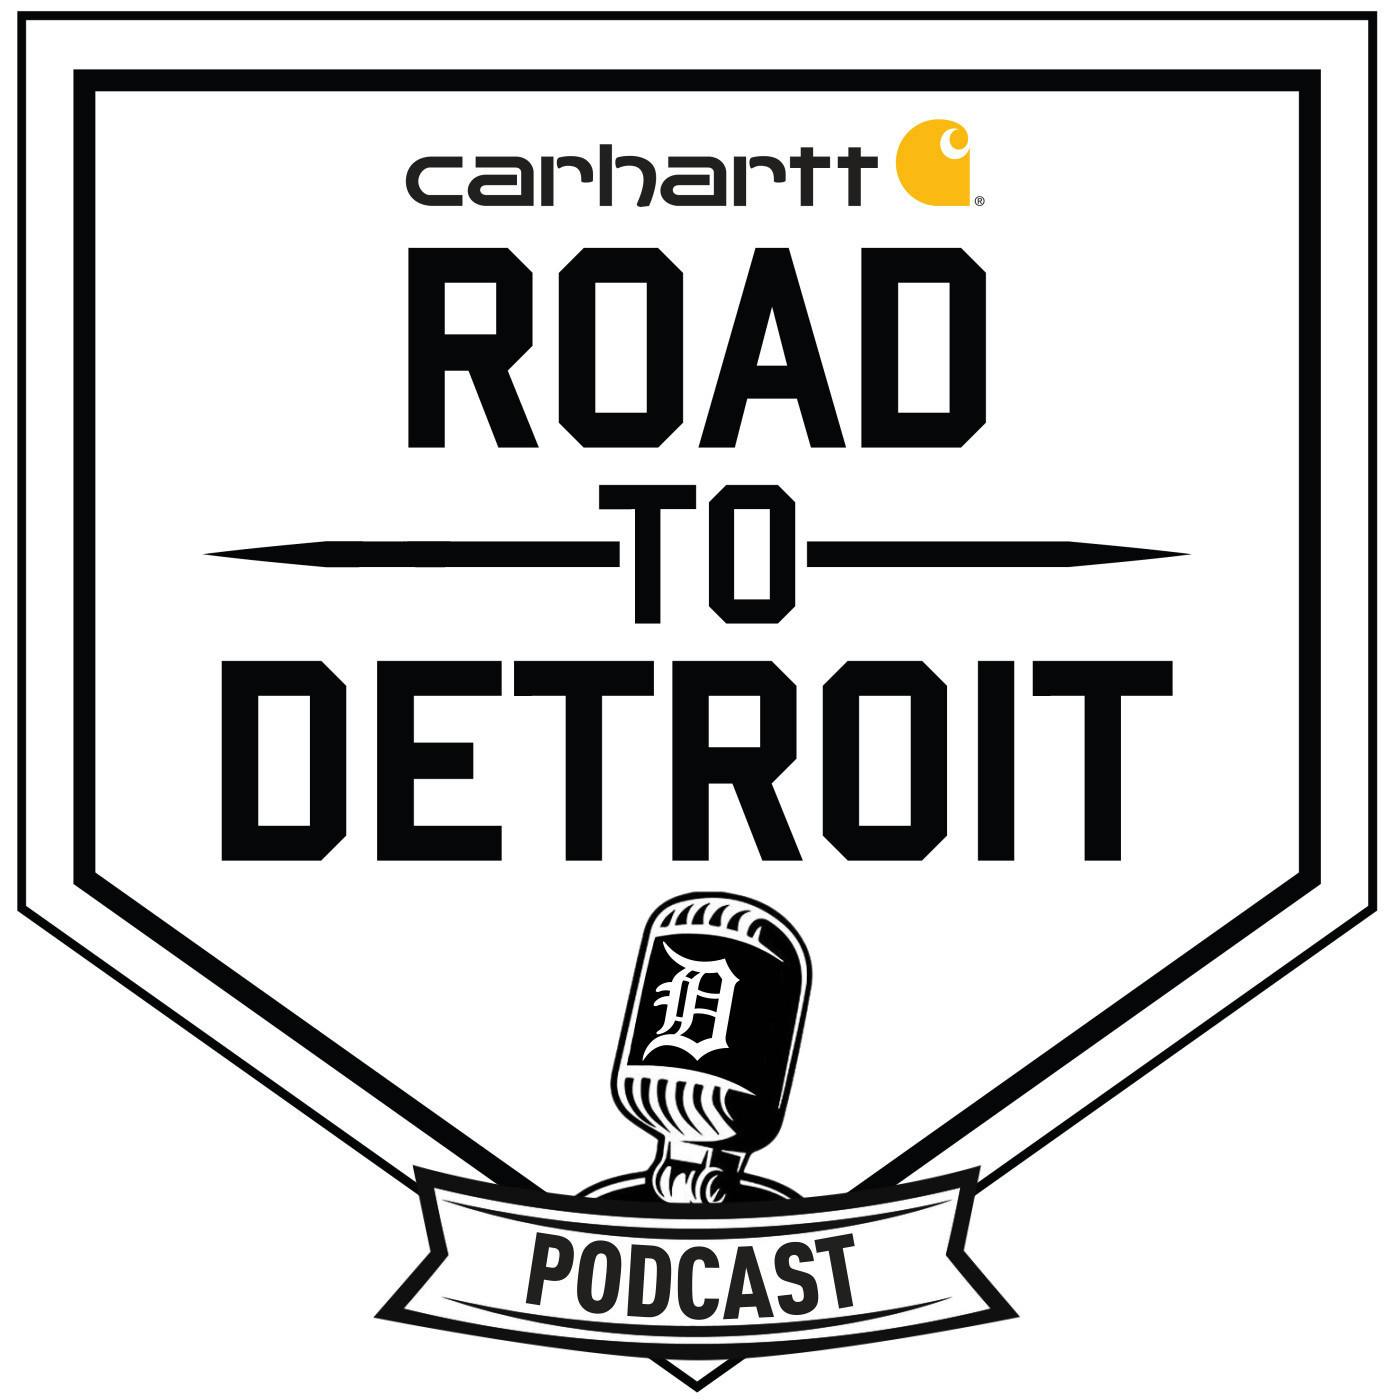 Road To Detroit presented by Carhartt Episode 1: We’re Back